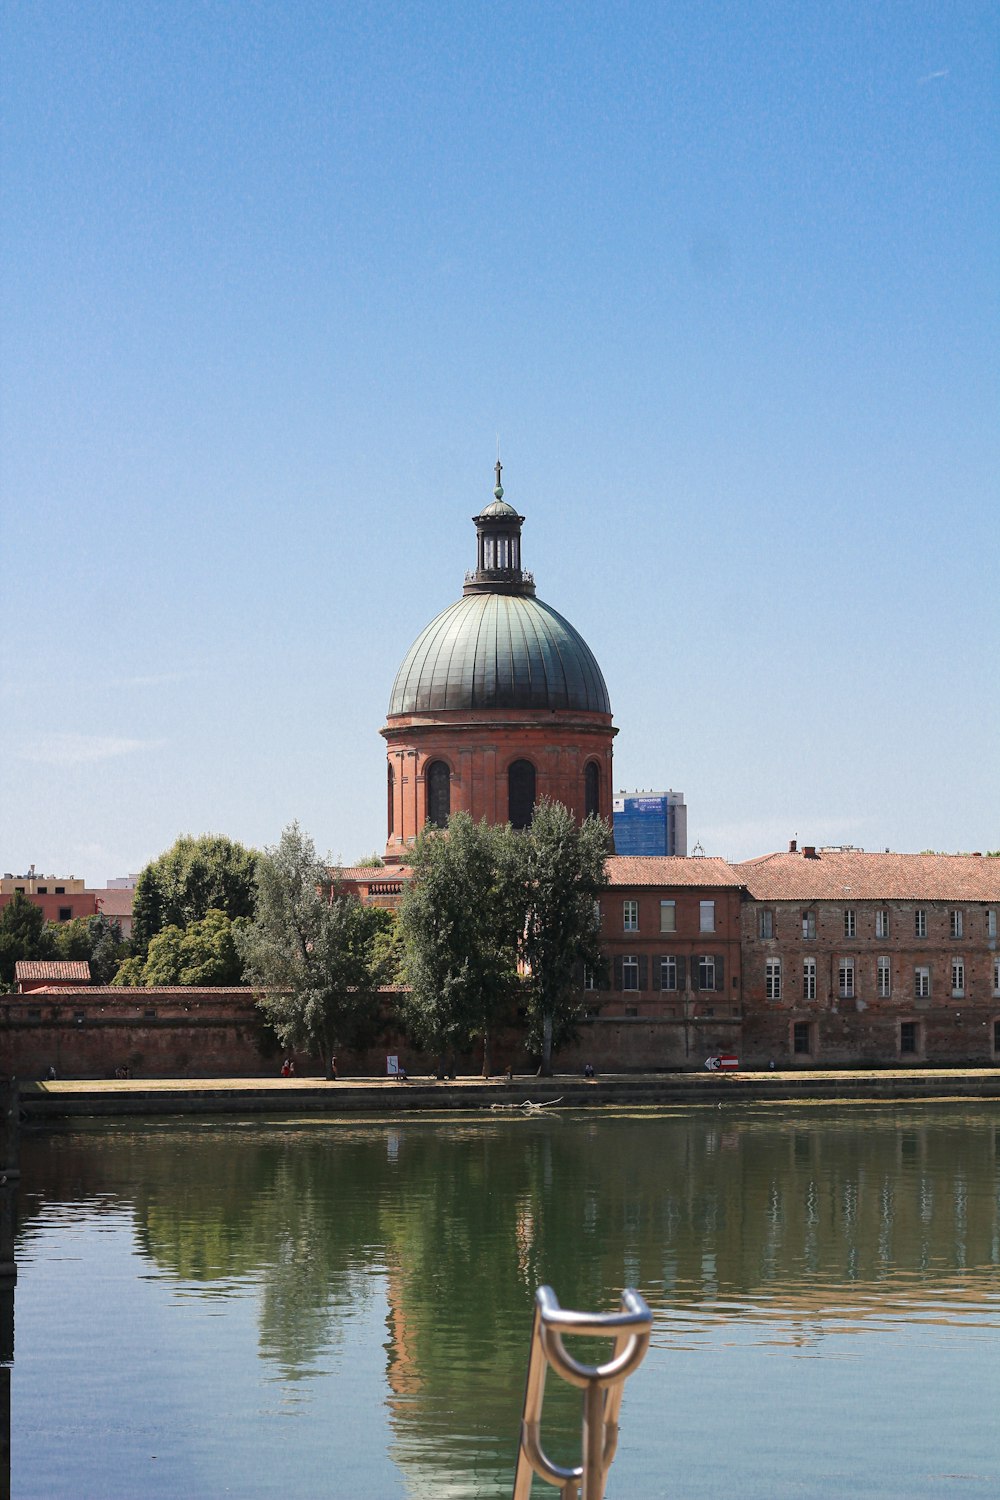 brown and white dome building near body of water during daytime